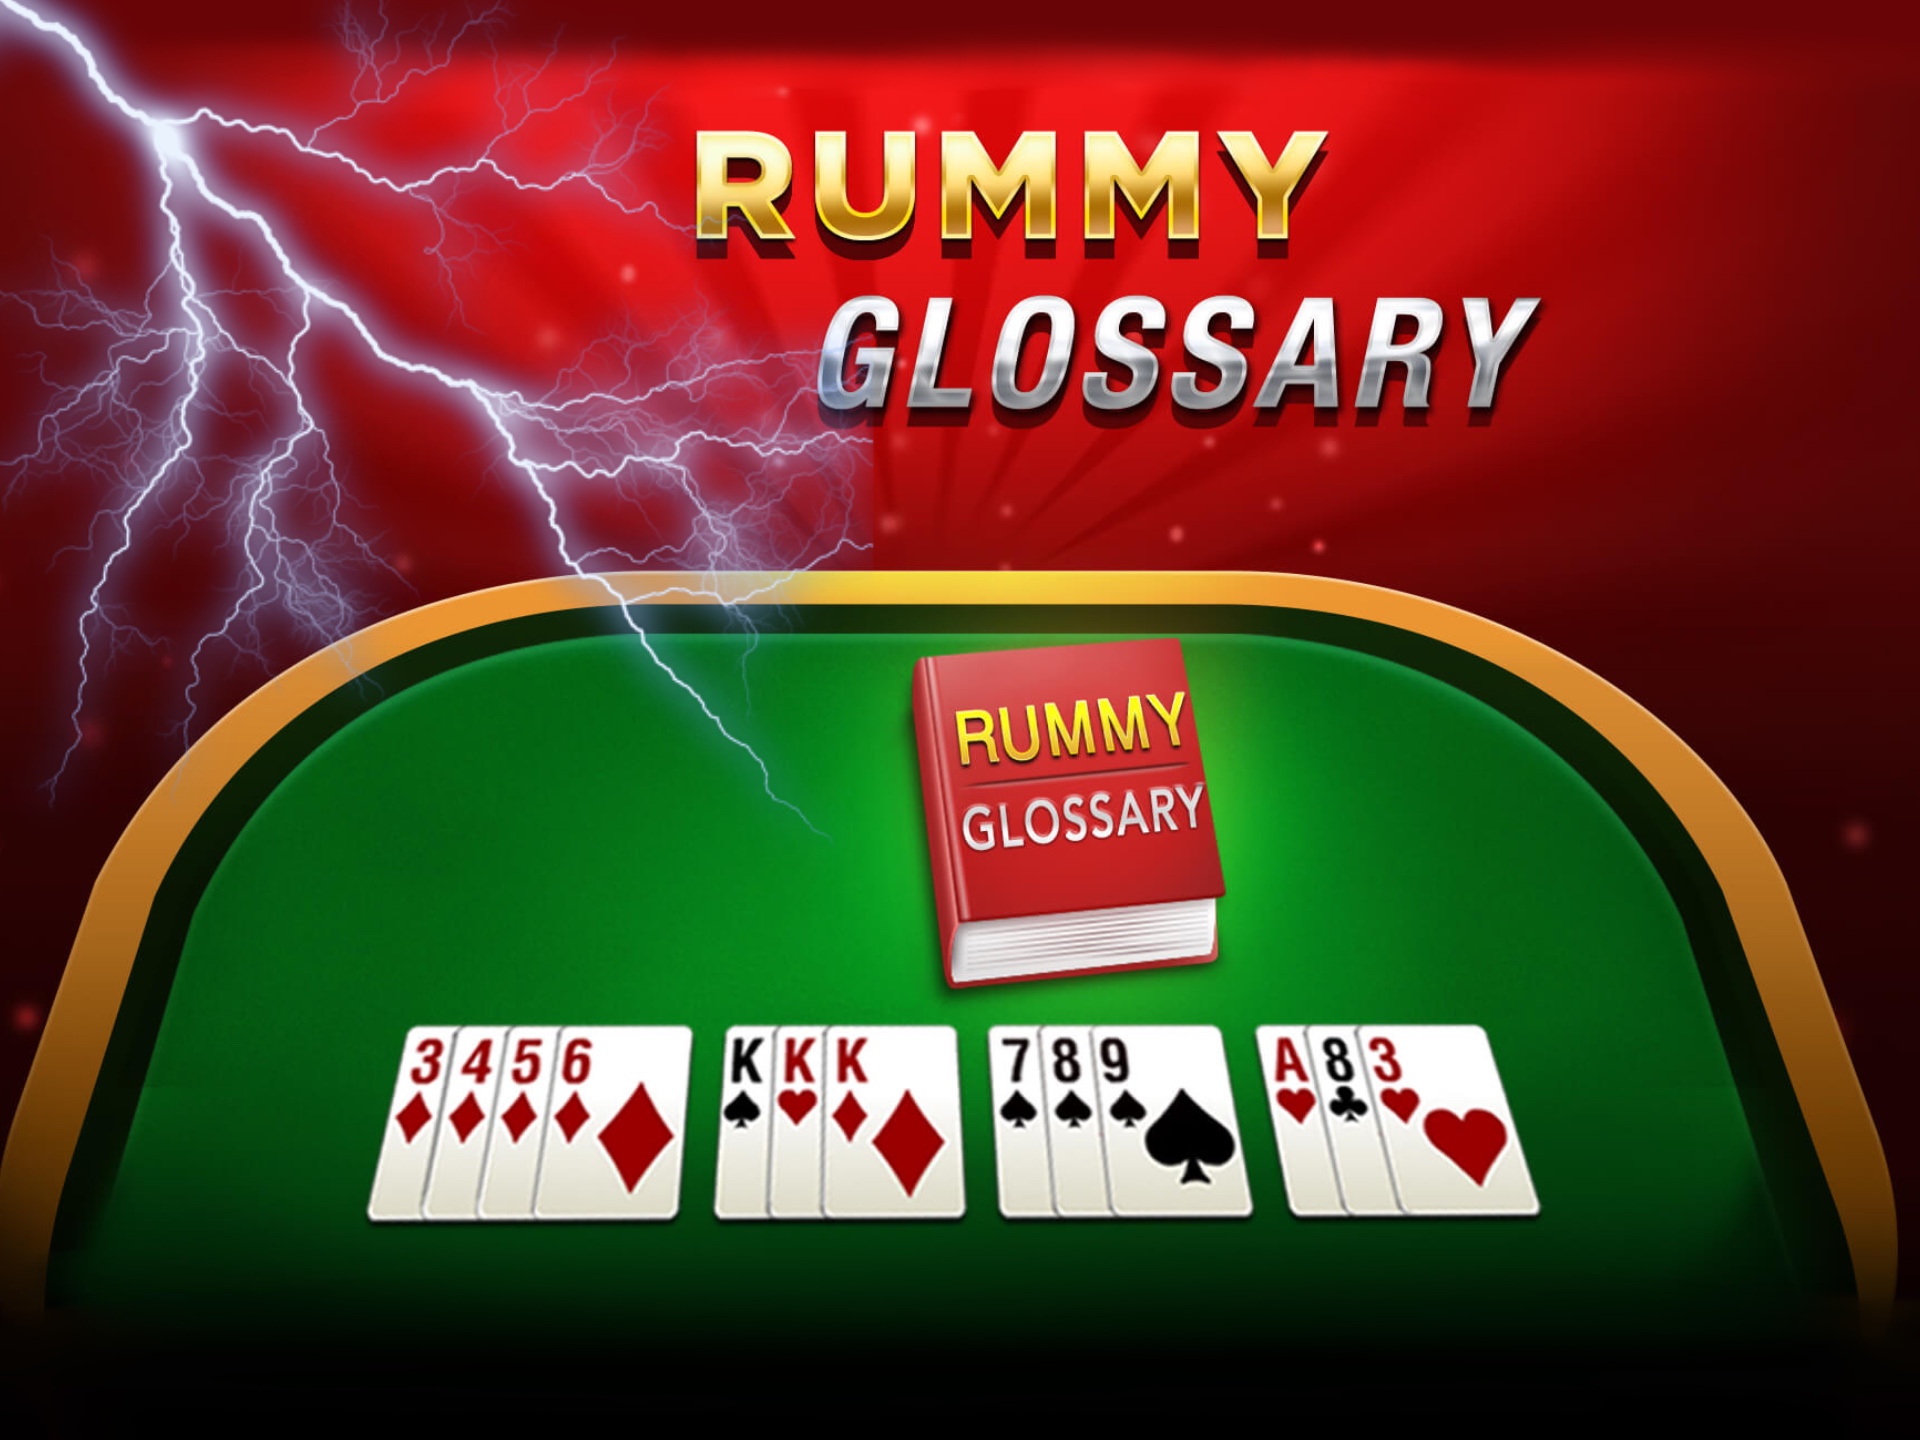 There are defined all main rummy terms